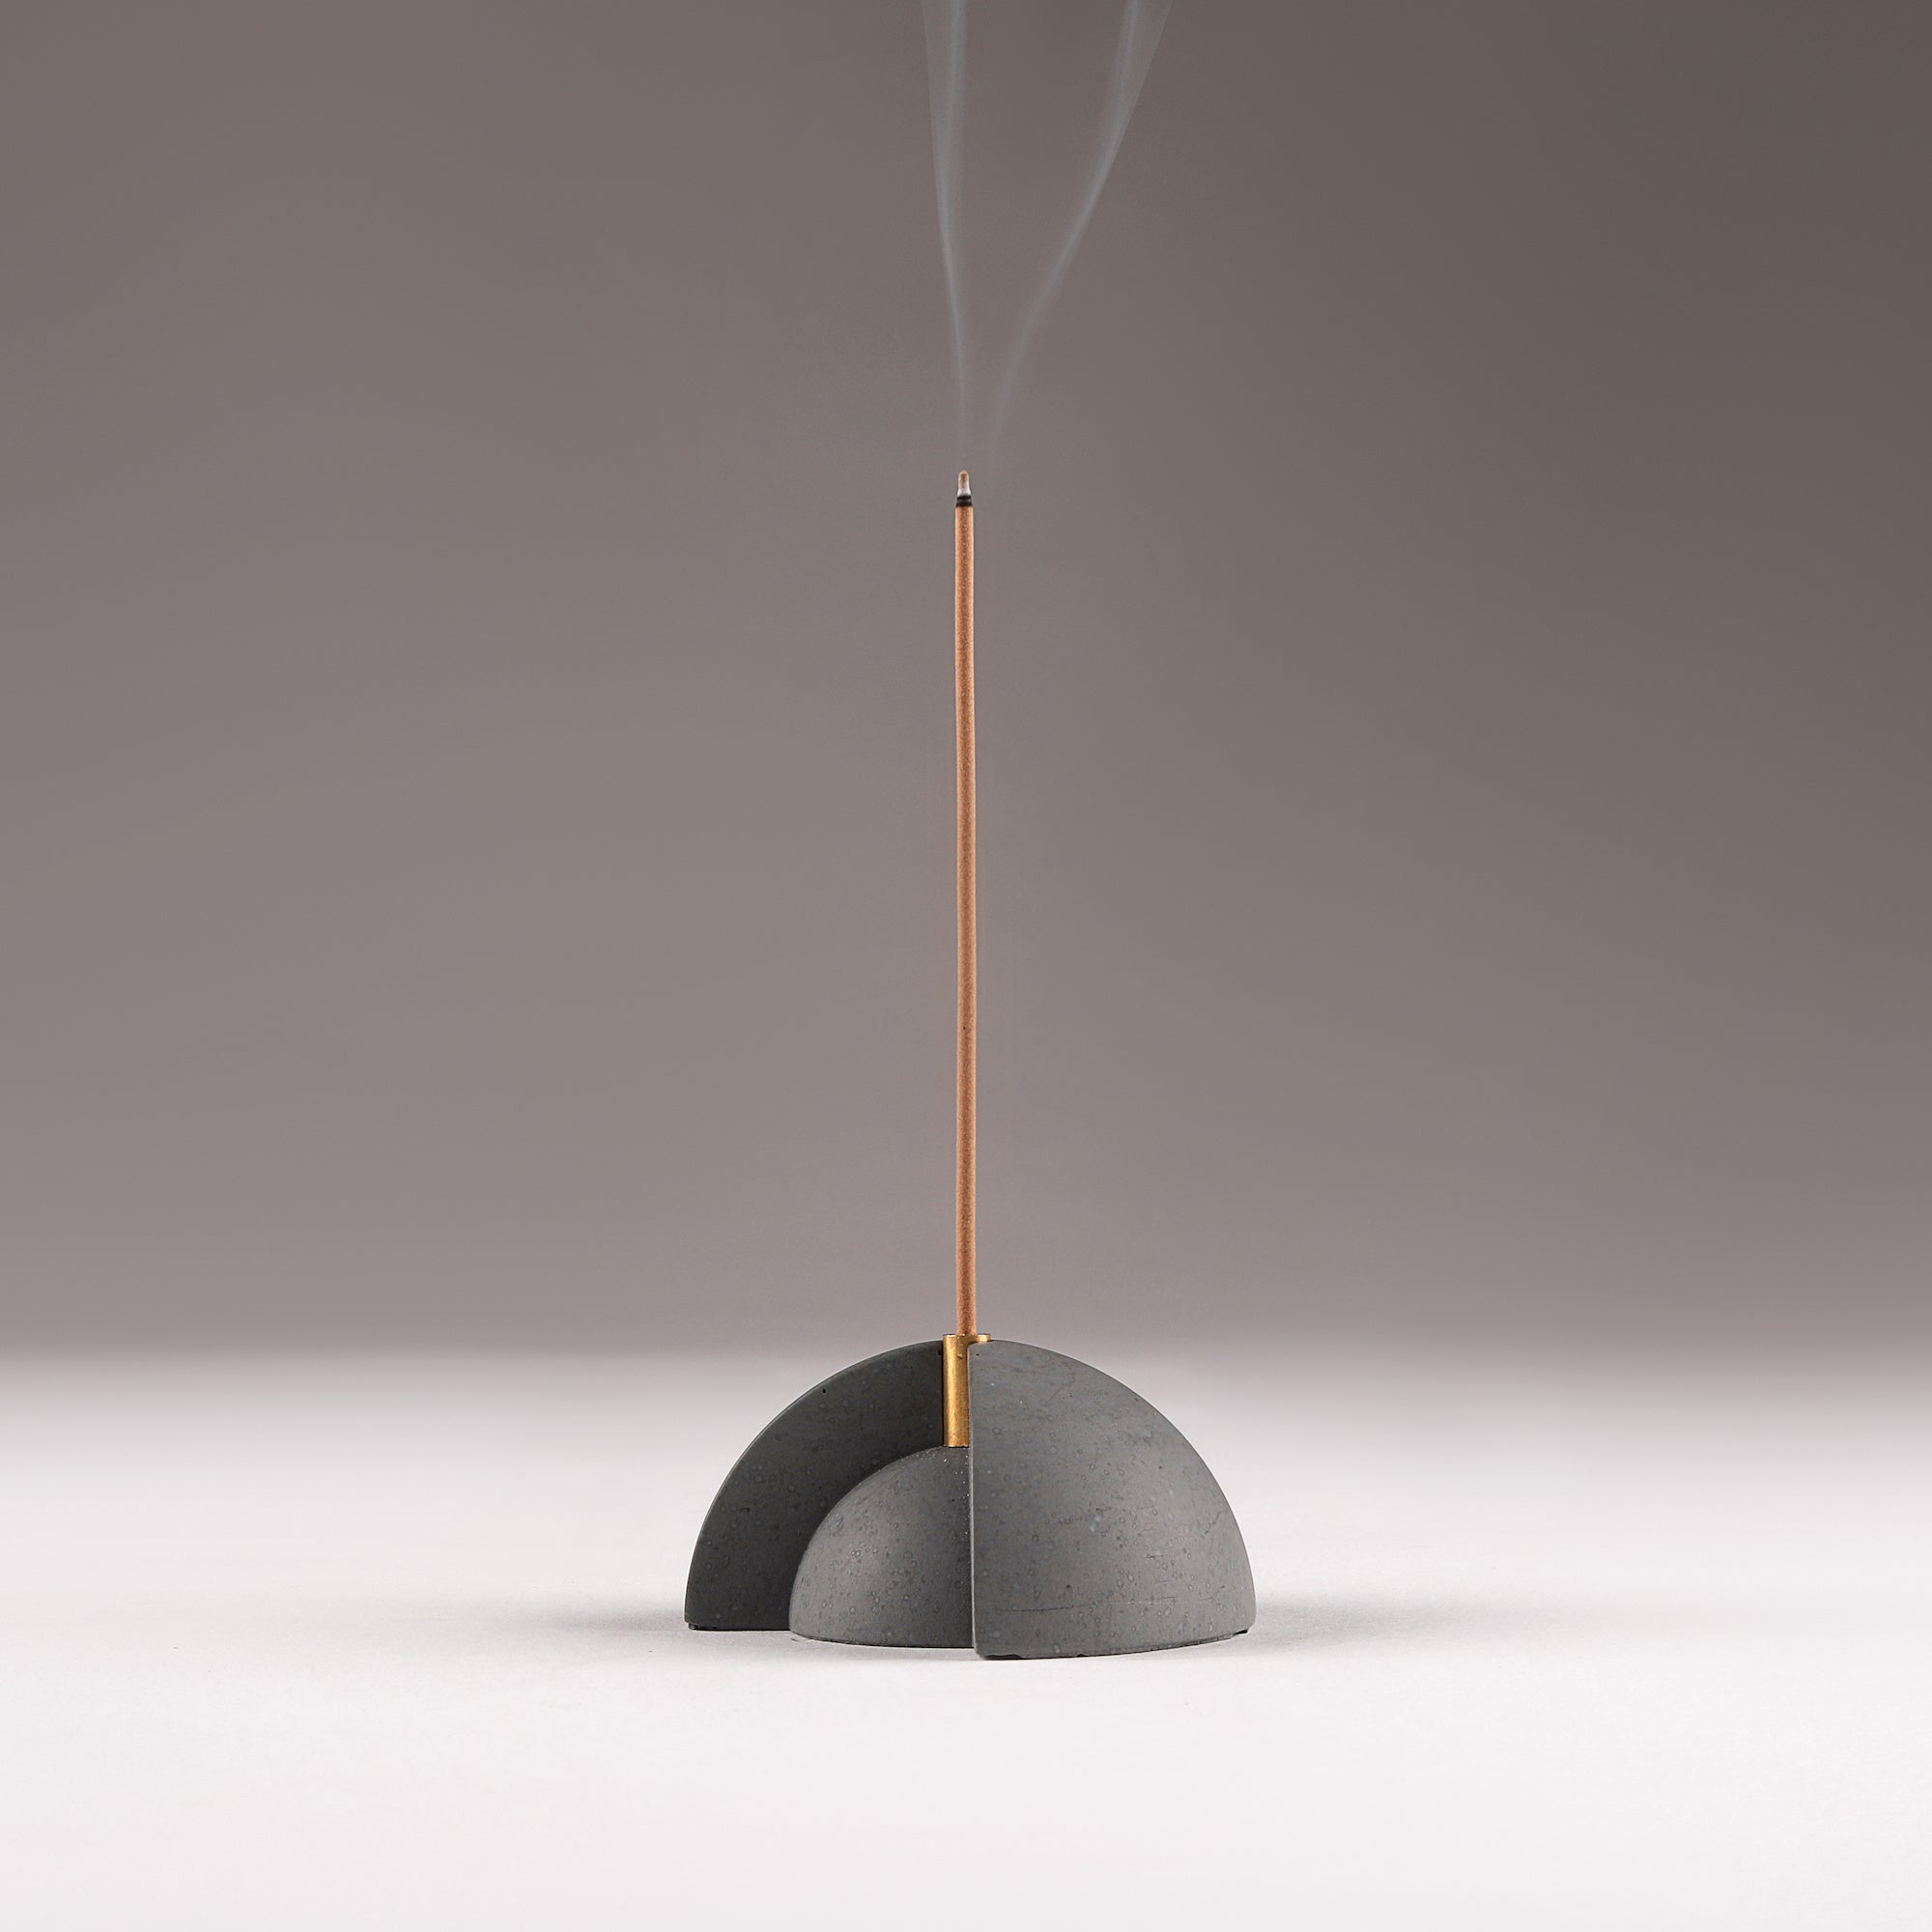 Front View of Modern Core Incense Burner by Kin Objects